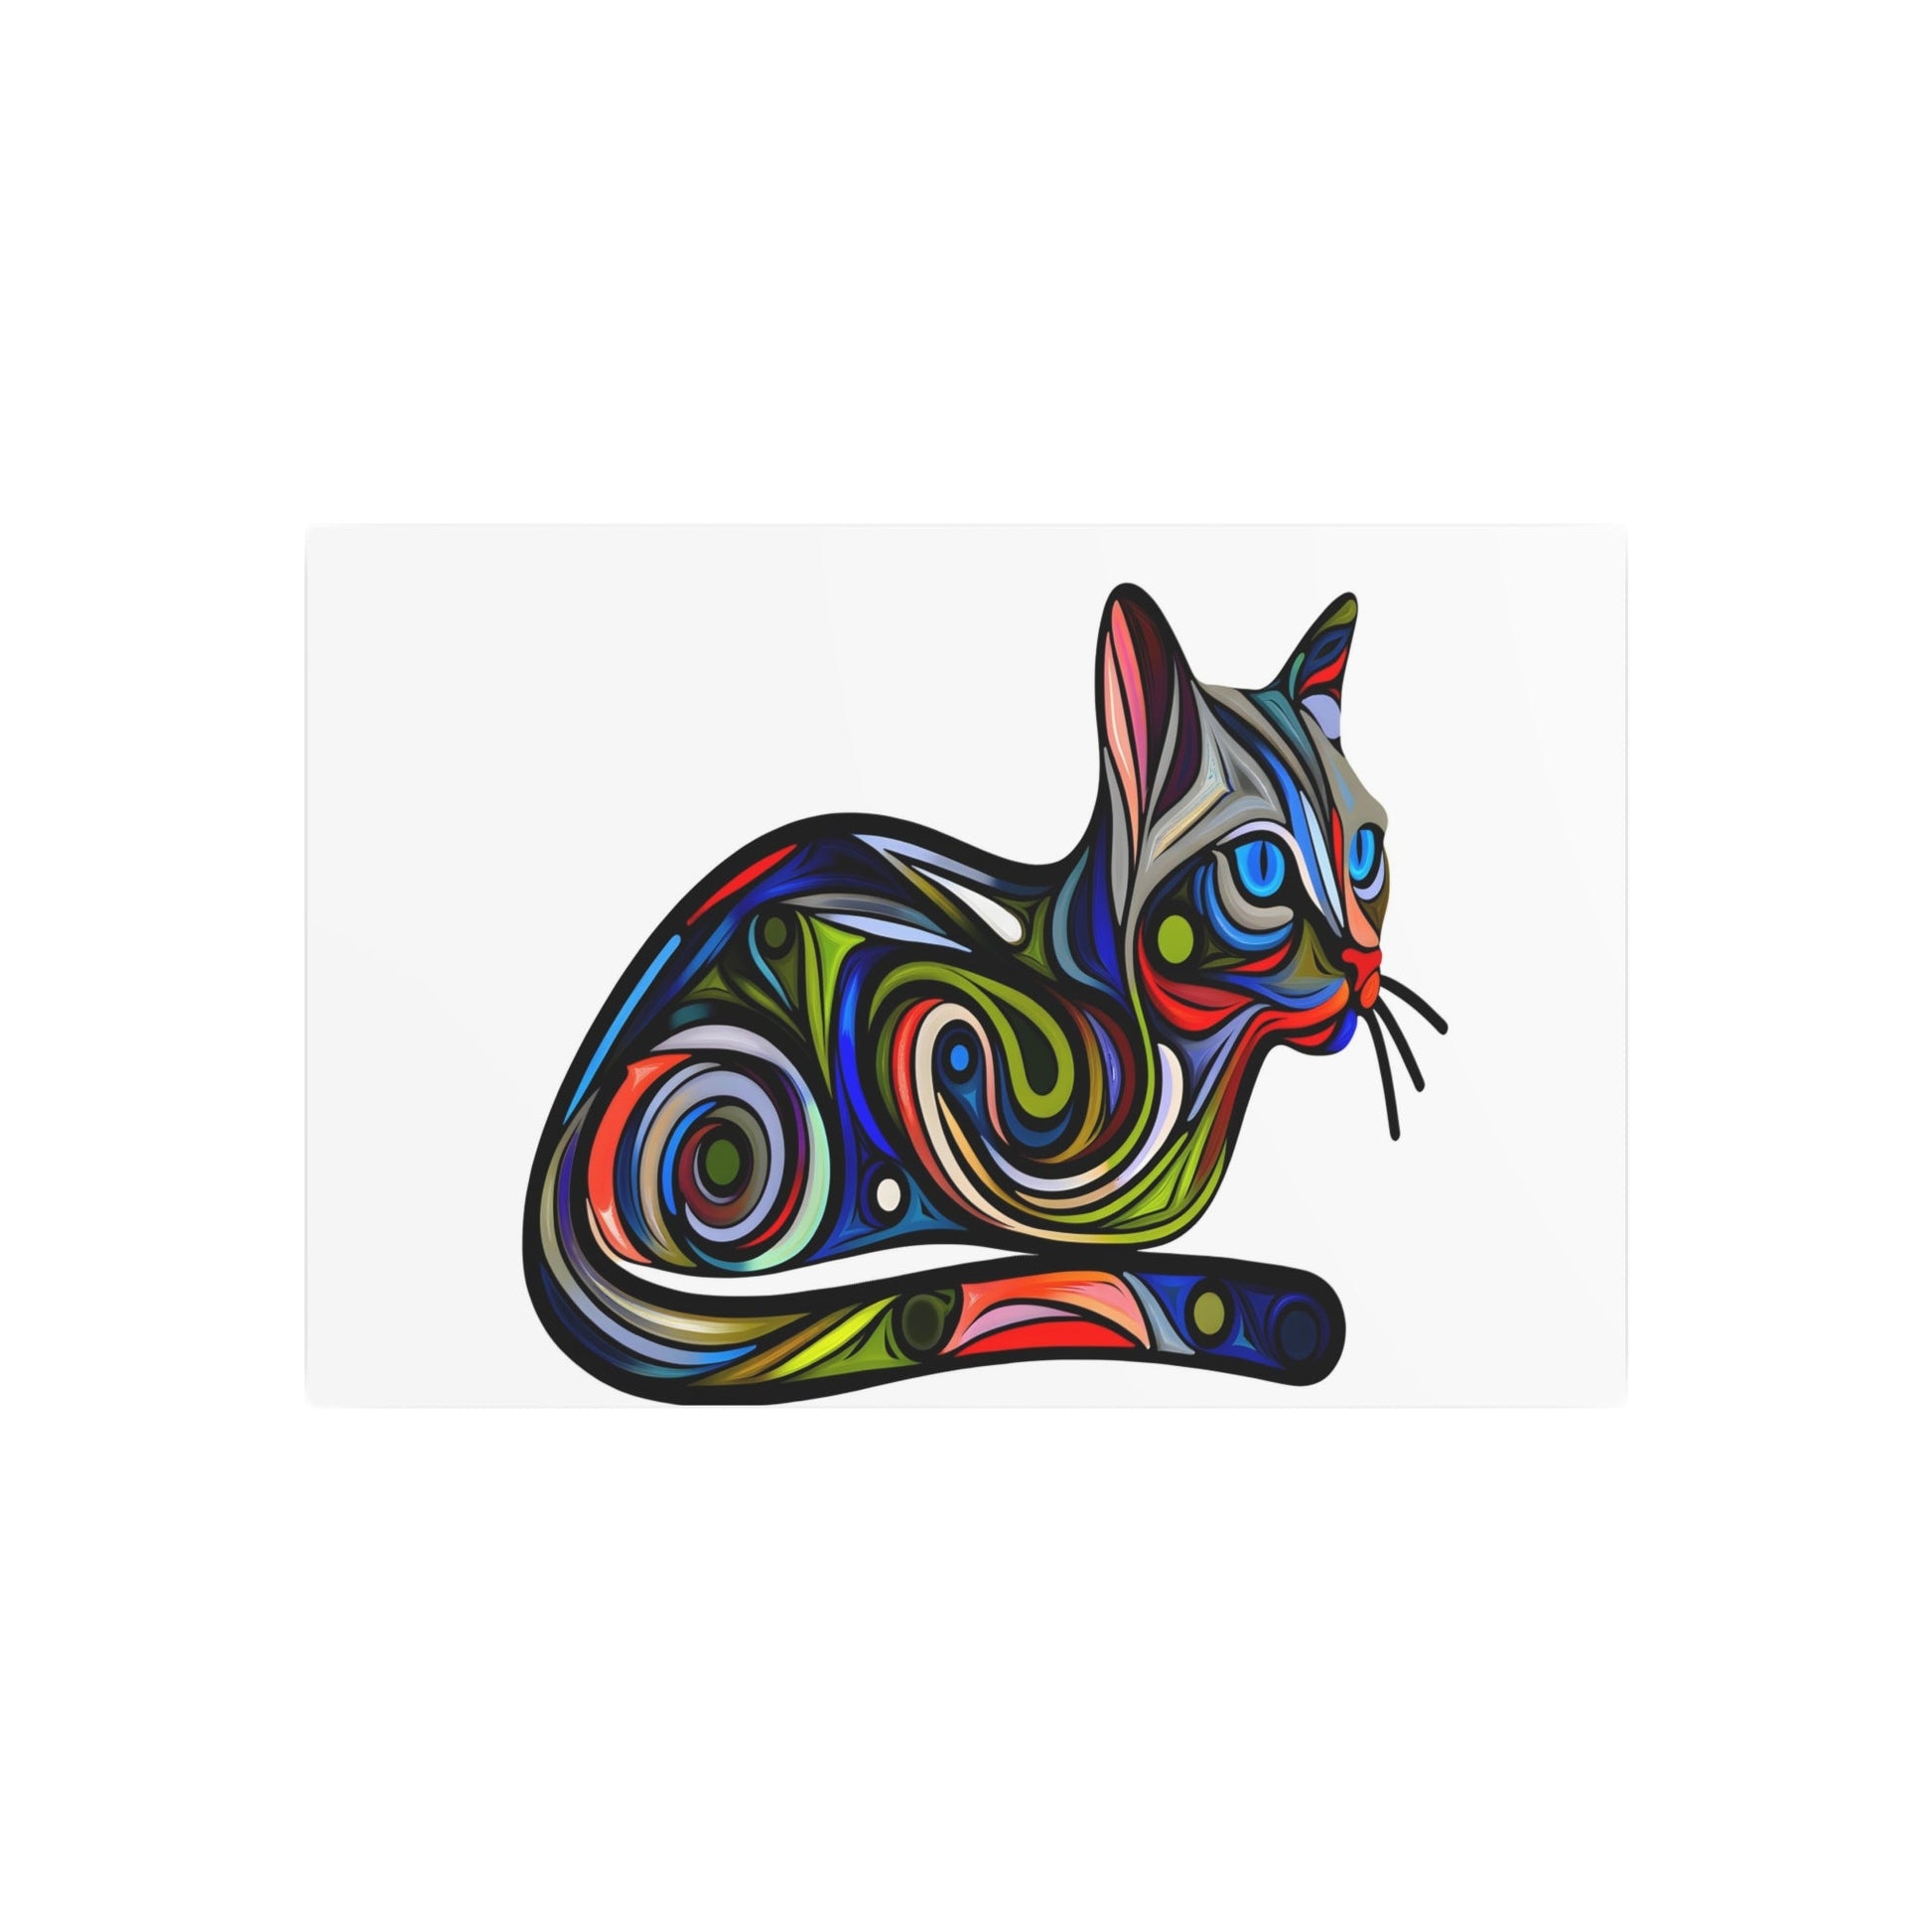 Metal Poster Art | "Vibrant & Intricate Digital Art: Modern & Contemporary Style Expressive Cat Image with Creative Patterns and Mysterious Playfulness" - Metal Poster Art 30″ x 20″ (Horizontal) 0.12''